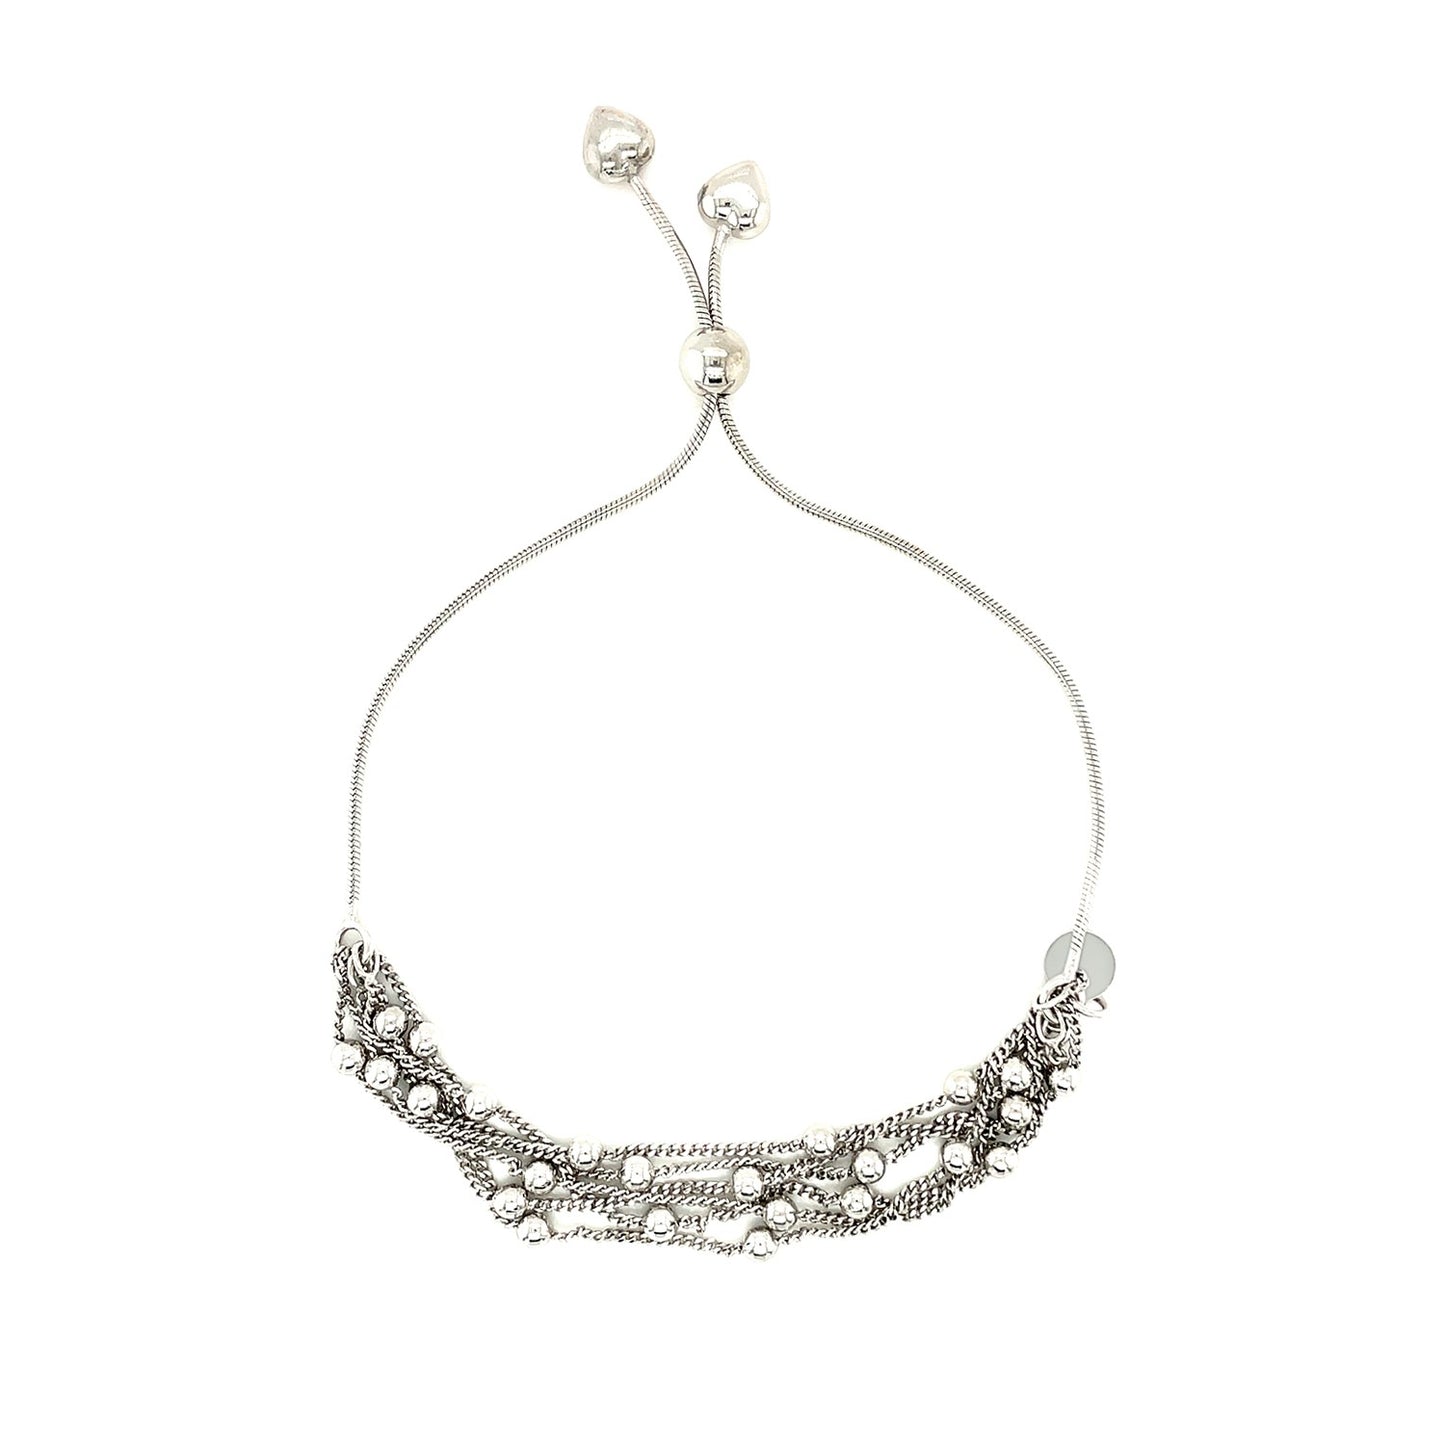 Adjustable Multi-Strand Chain and Bead Bracelet in Sterling Silver